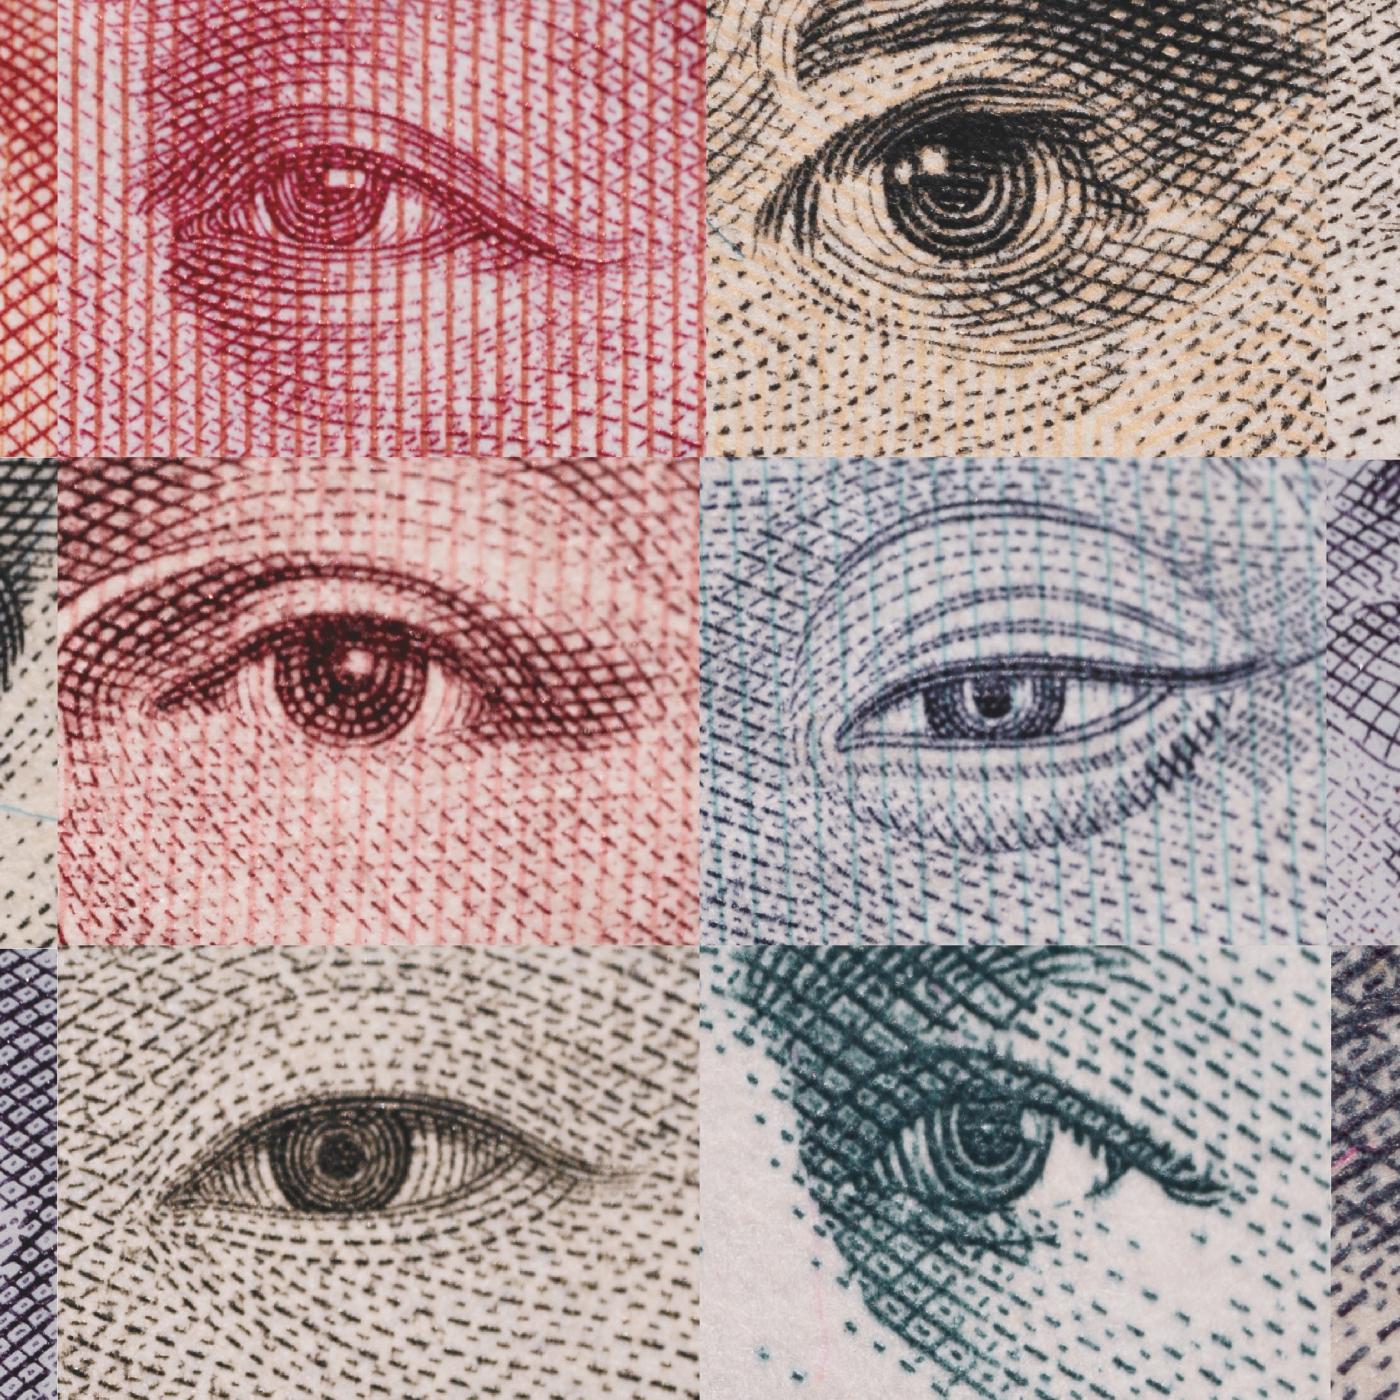 Close up of eyes from currencies